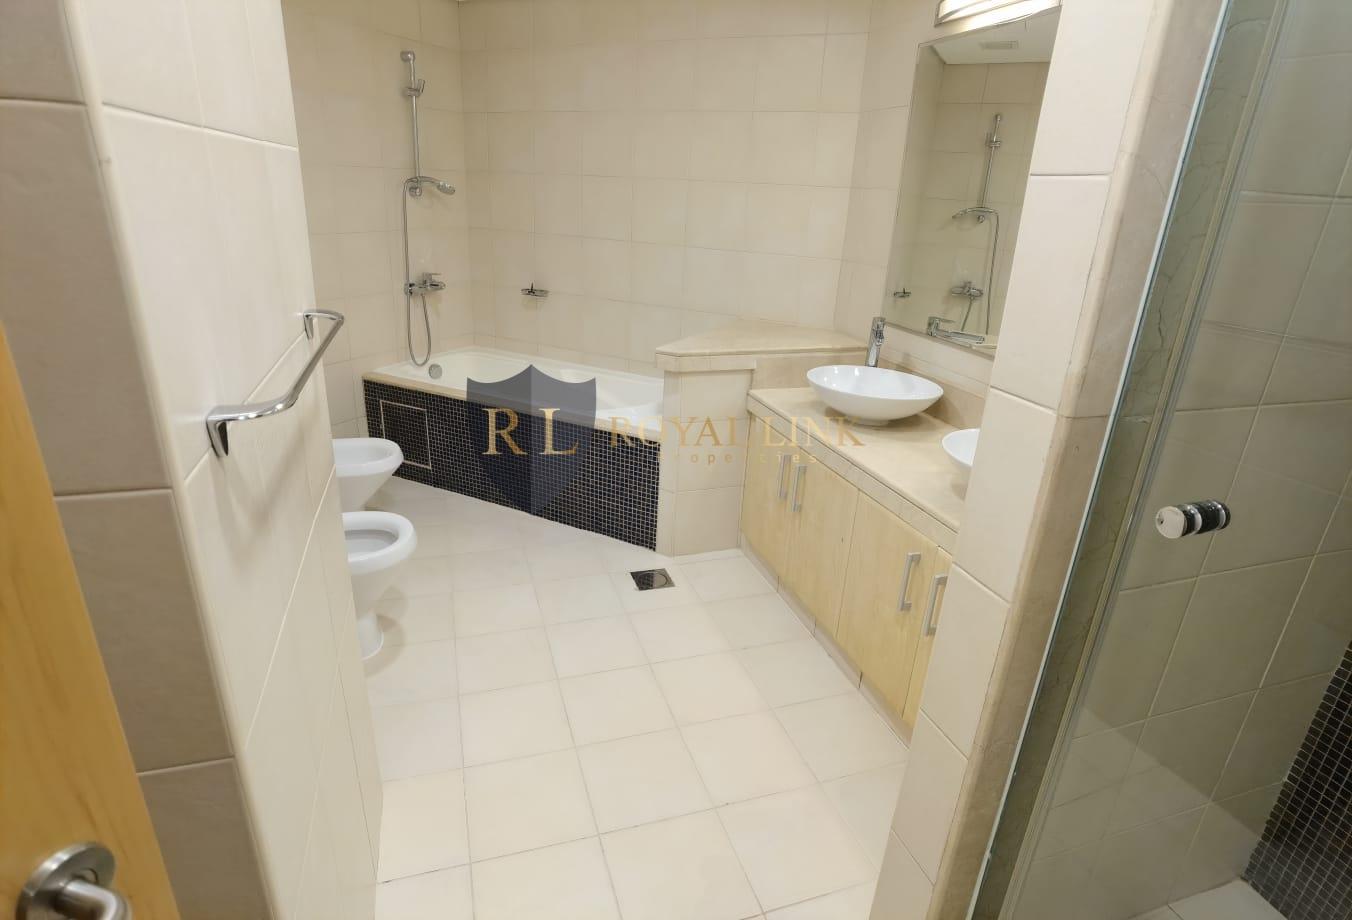 3 bed, 4 bath Apartment for rent in Al Das, Shoreline Apartments, Palm Jumeirah, Dubai for price AED 298999 yearly 